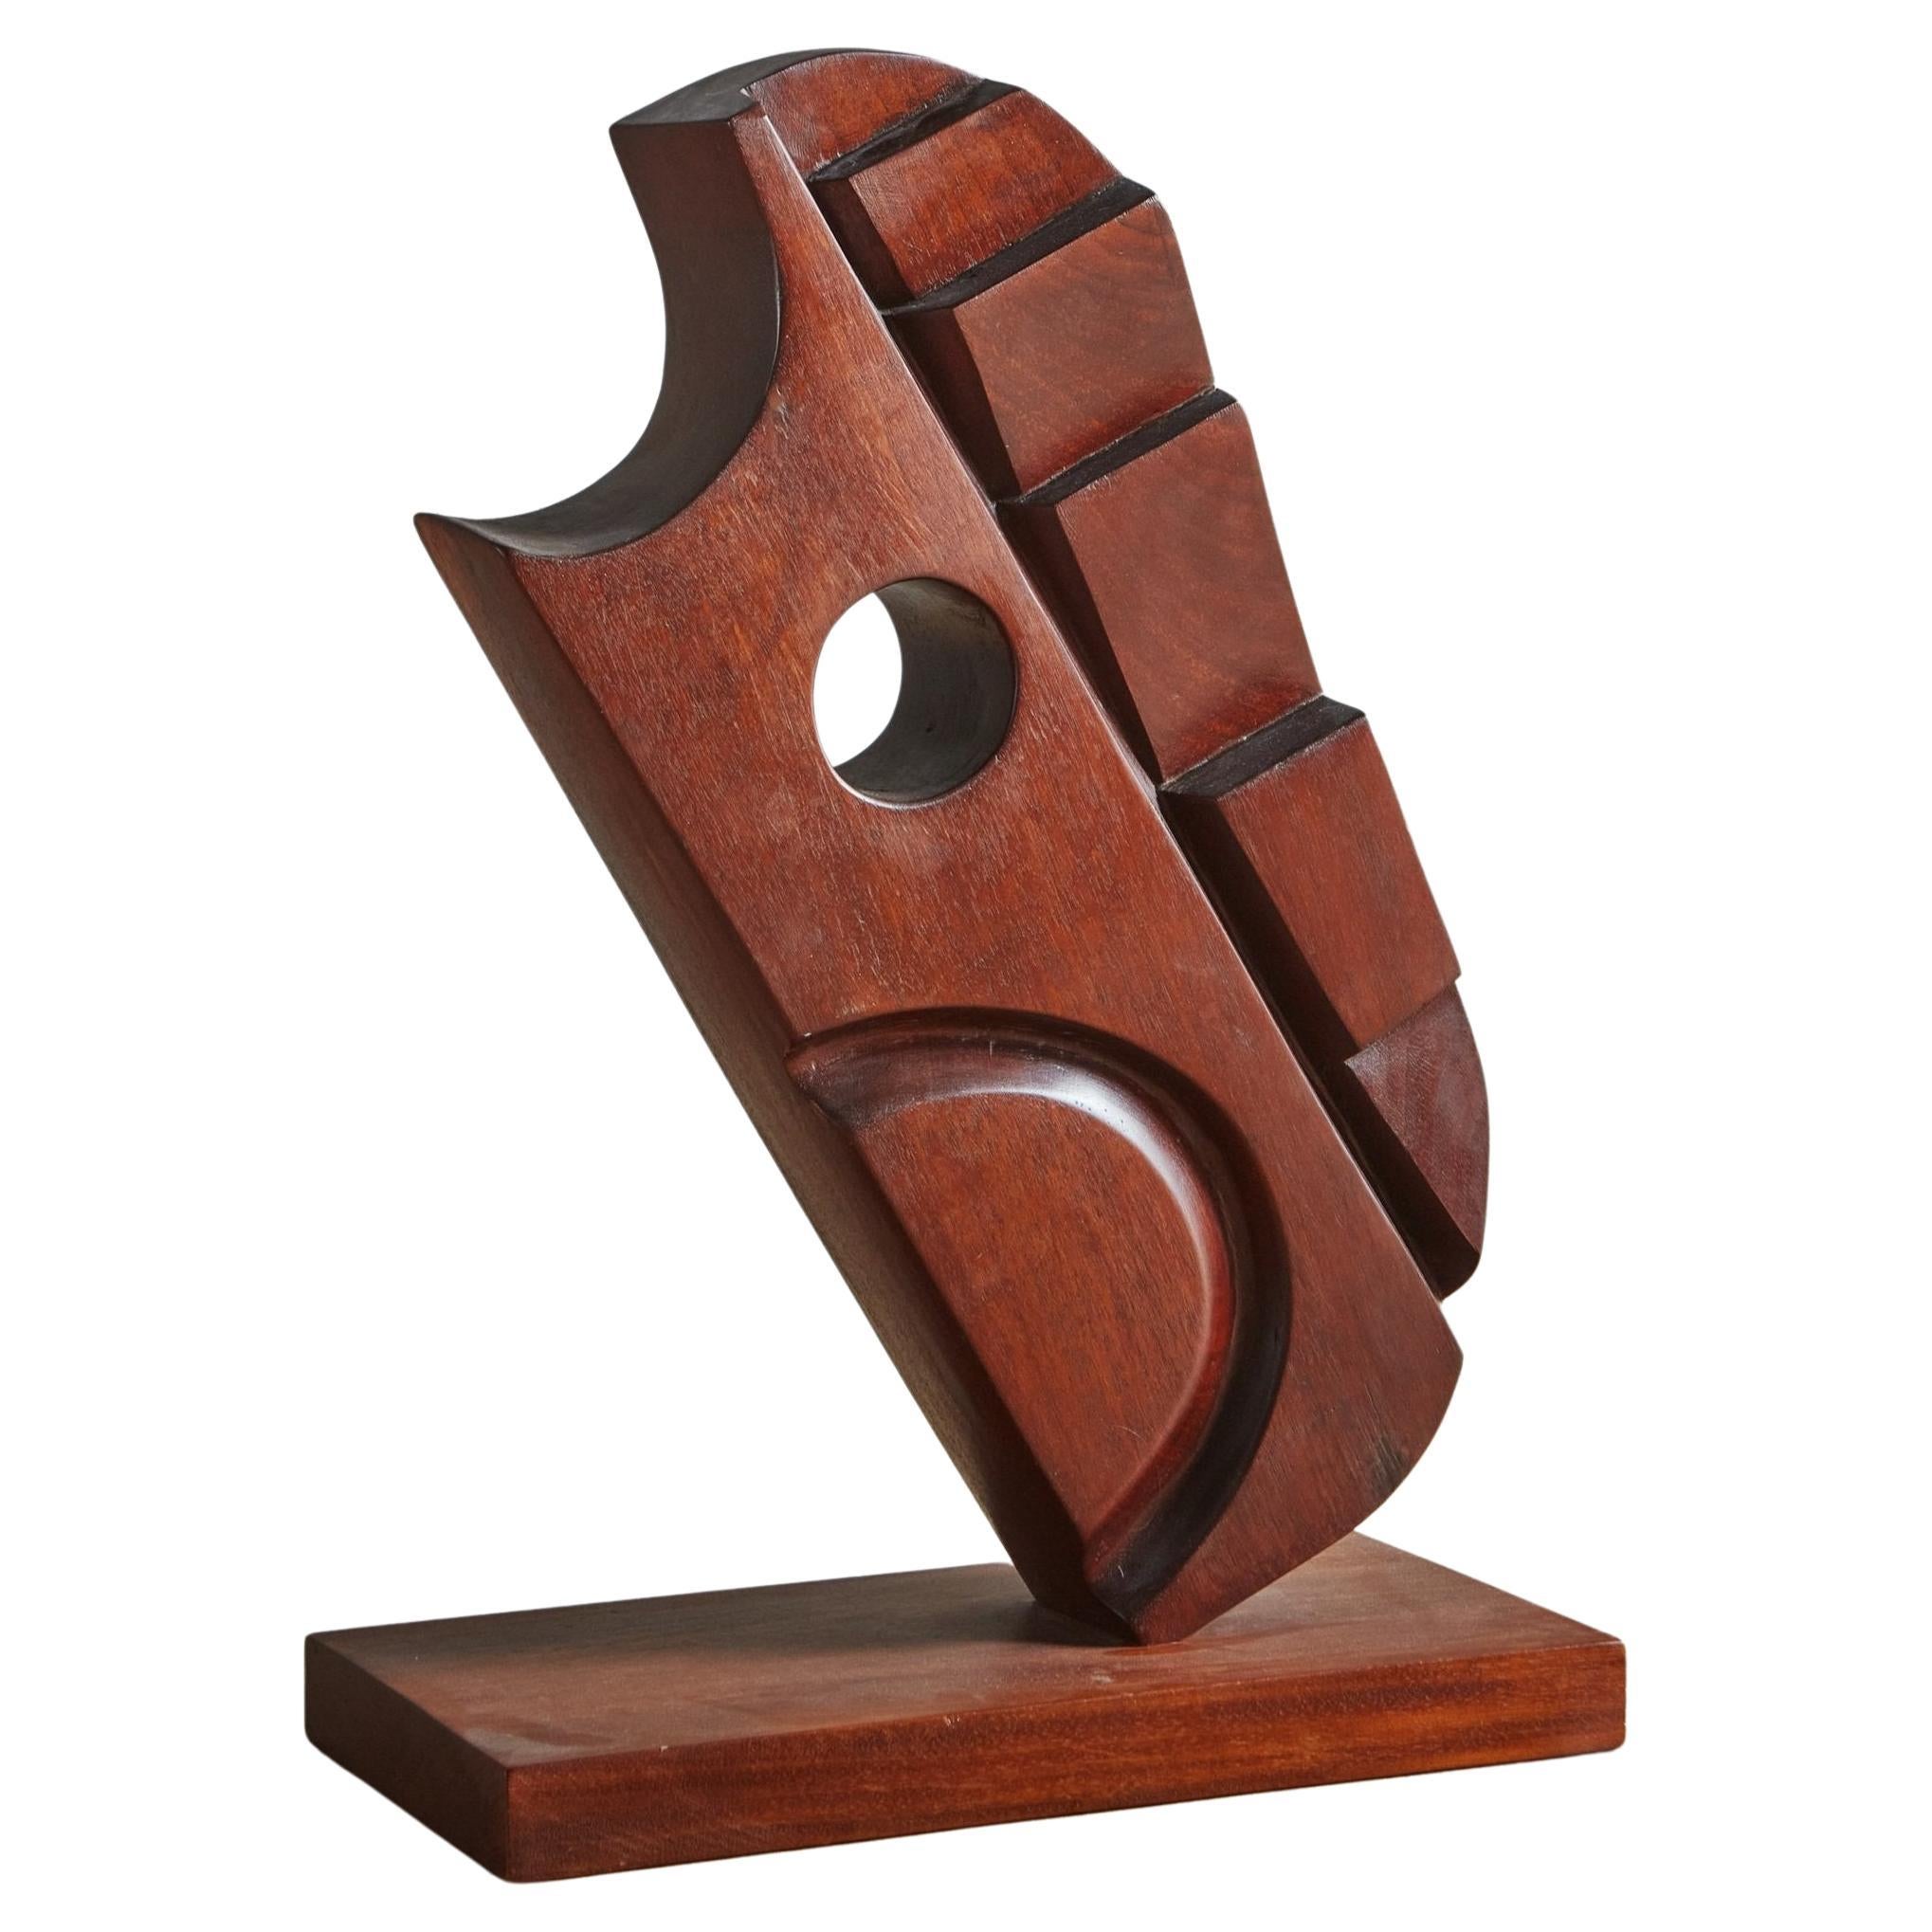 Geometric Wooden Sculpture by Suzanne Sumner, 1970s For Sale